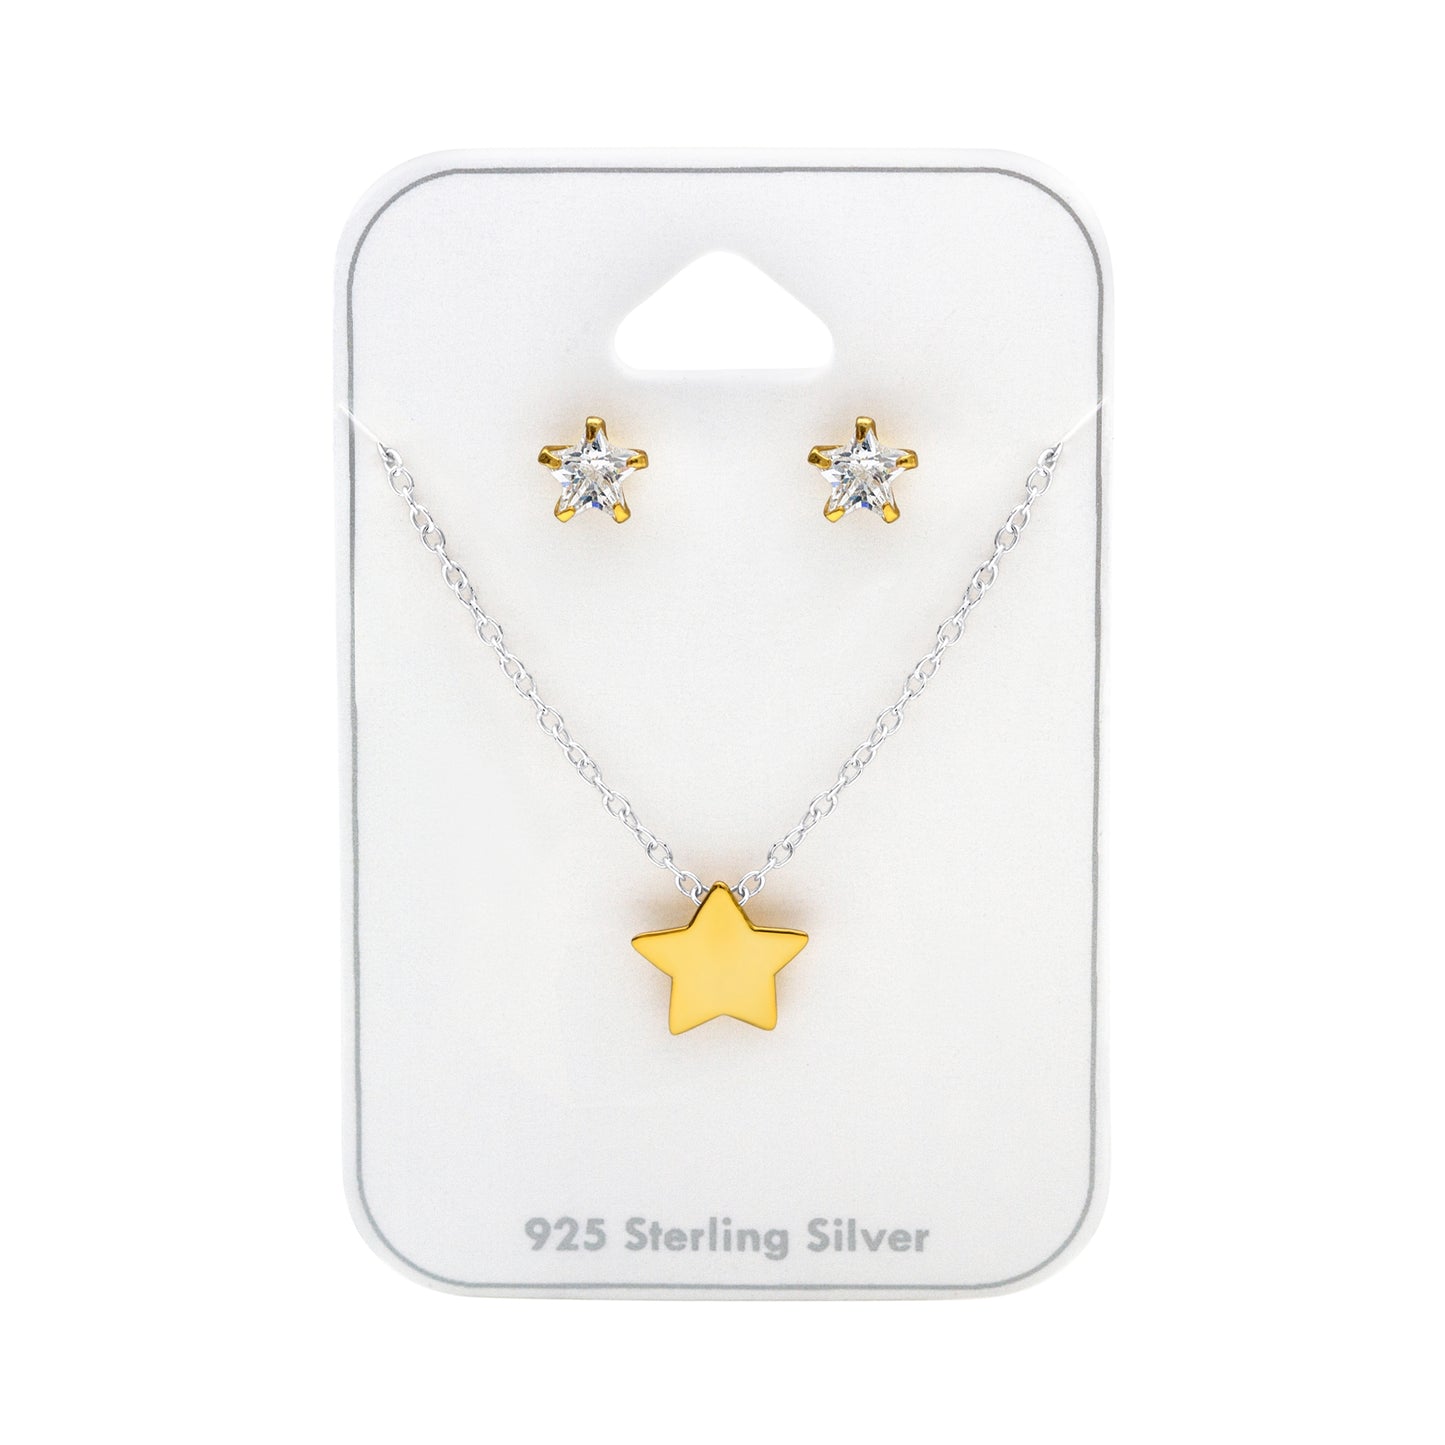 Goldtone Plated Sterling Silver Cubic Zirconia Star Earrings And Necklace